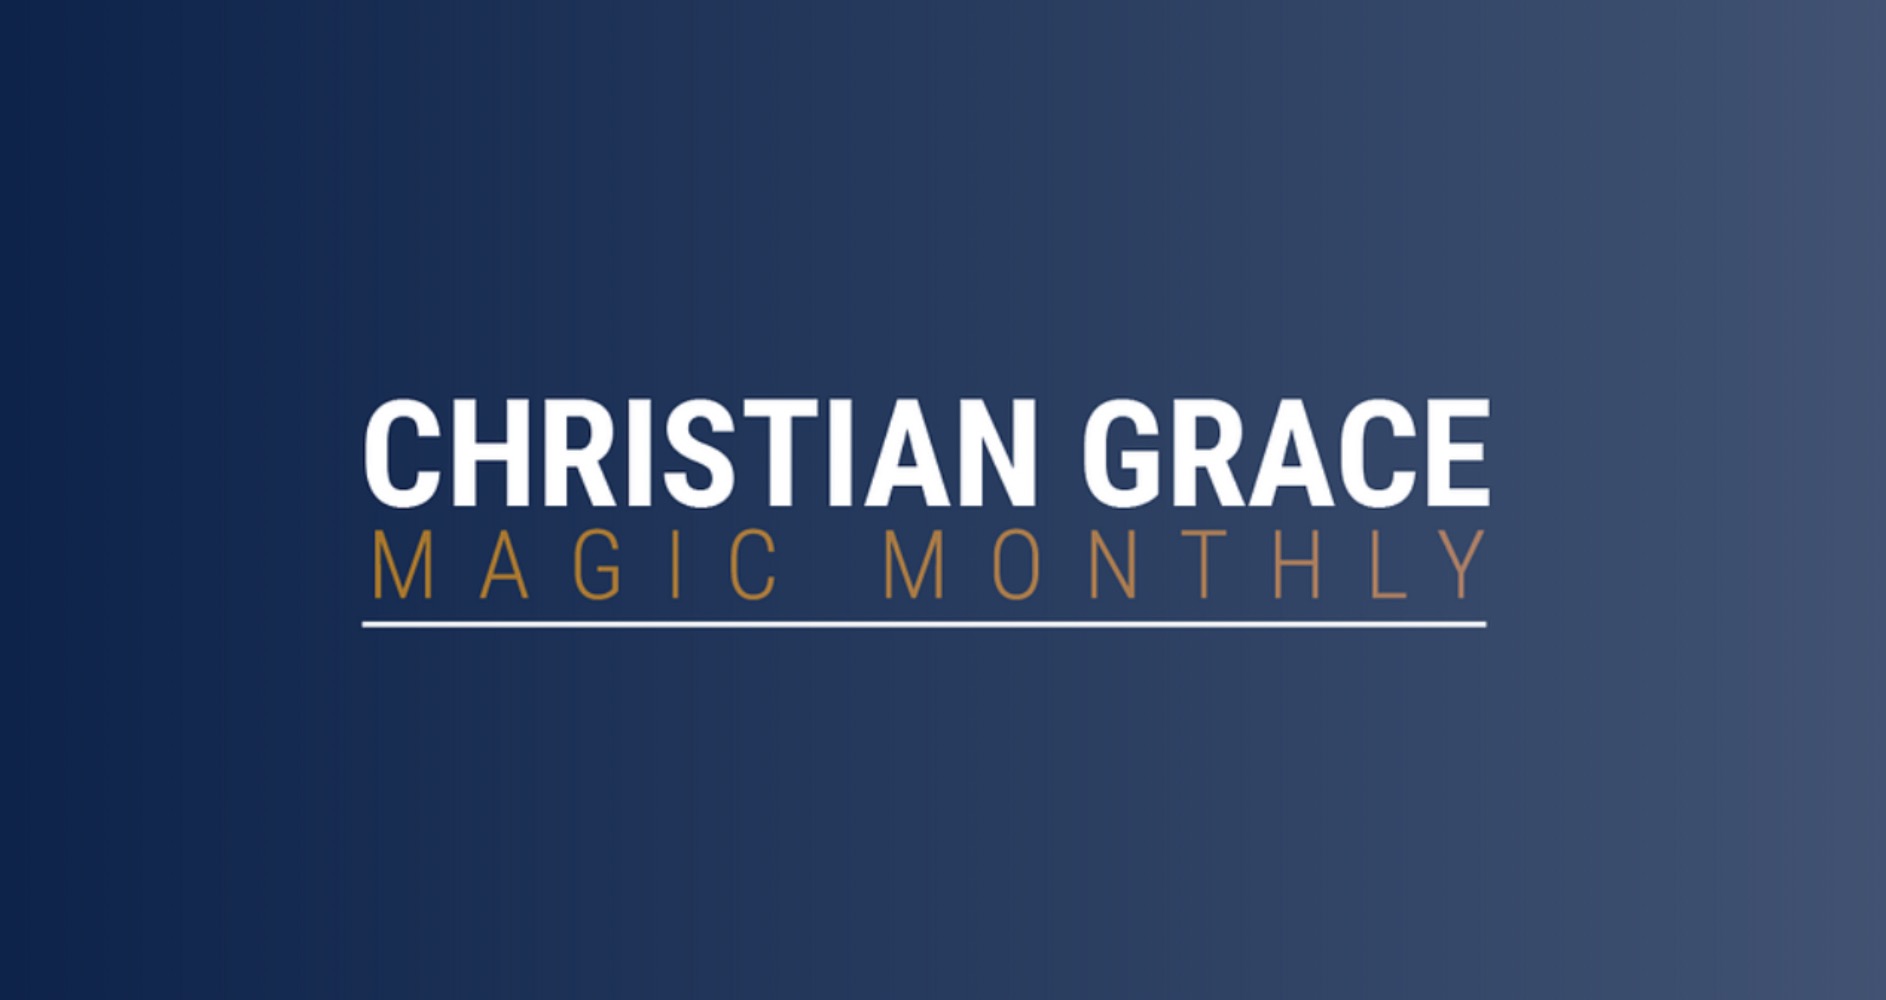 Unchanged Prediction by Christian Grace (Mp4 Video Download)